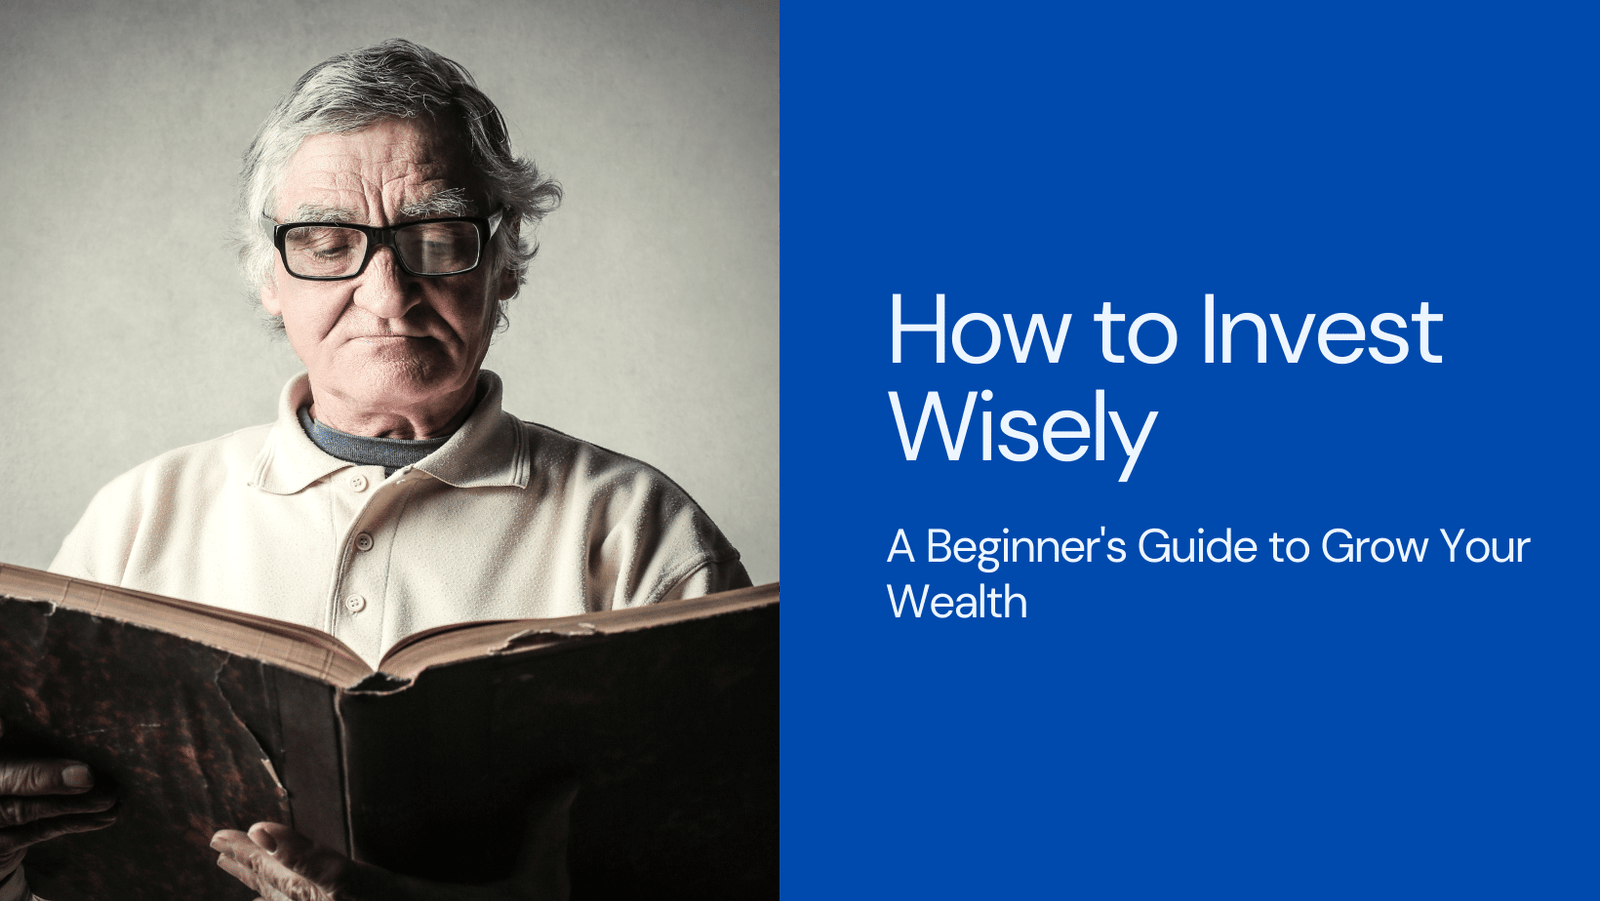 How to Invest Wisely A Beginner’s Guide